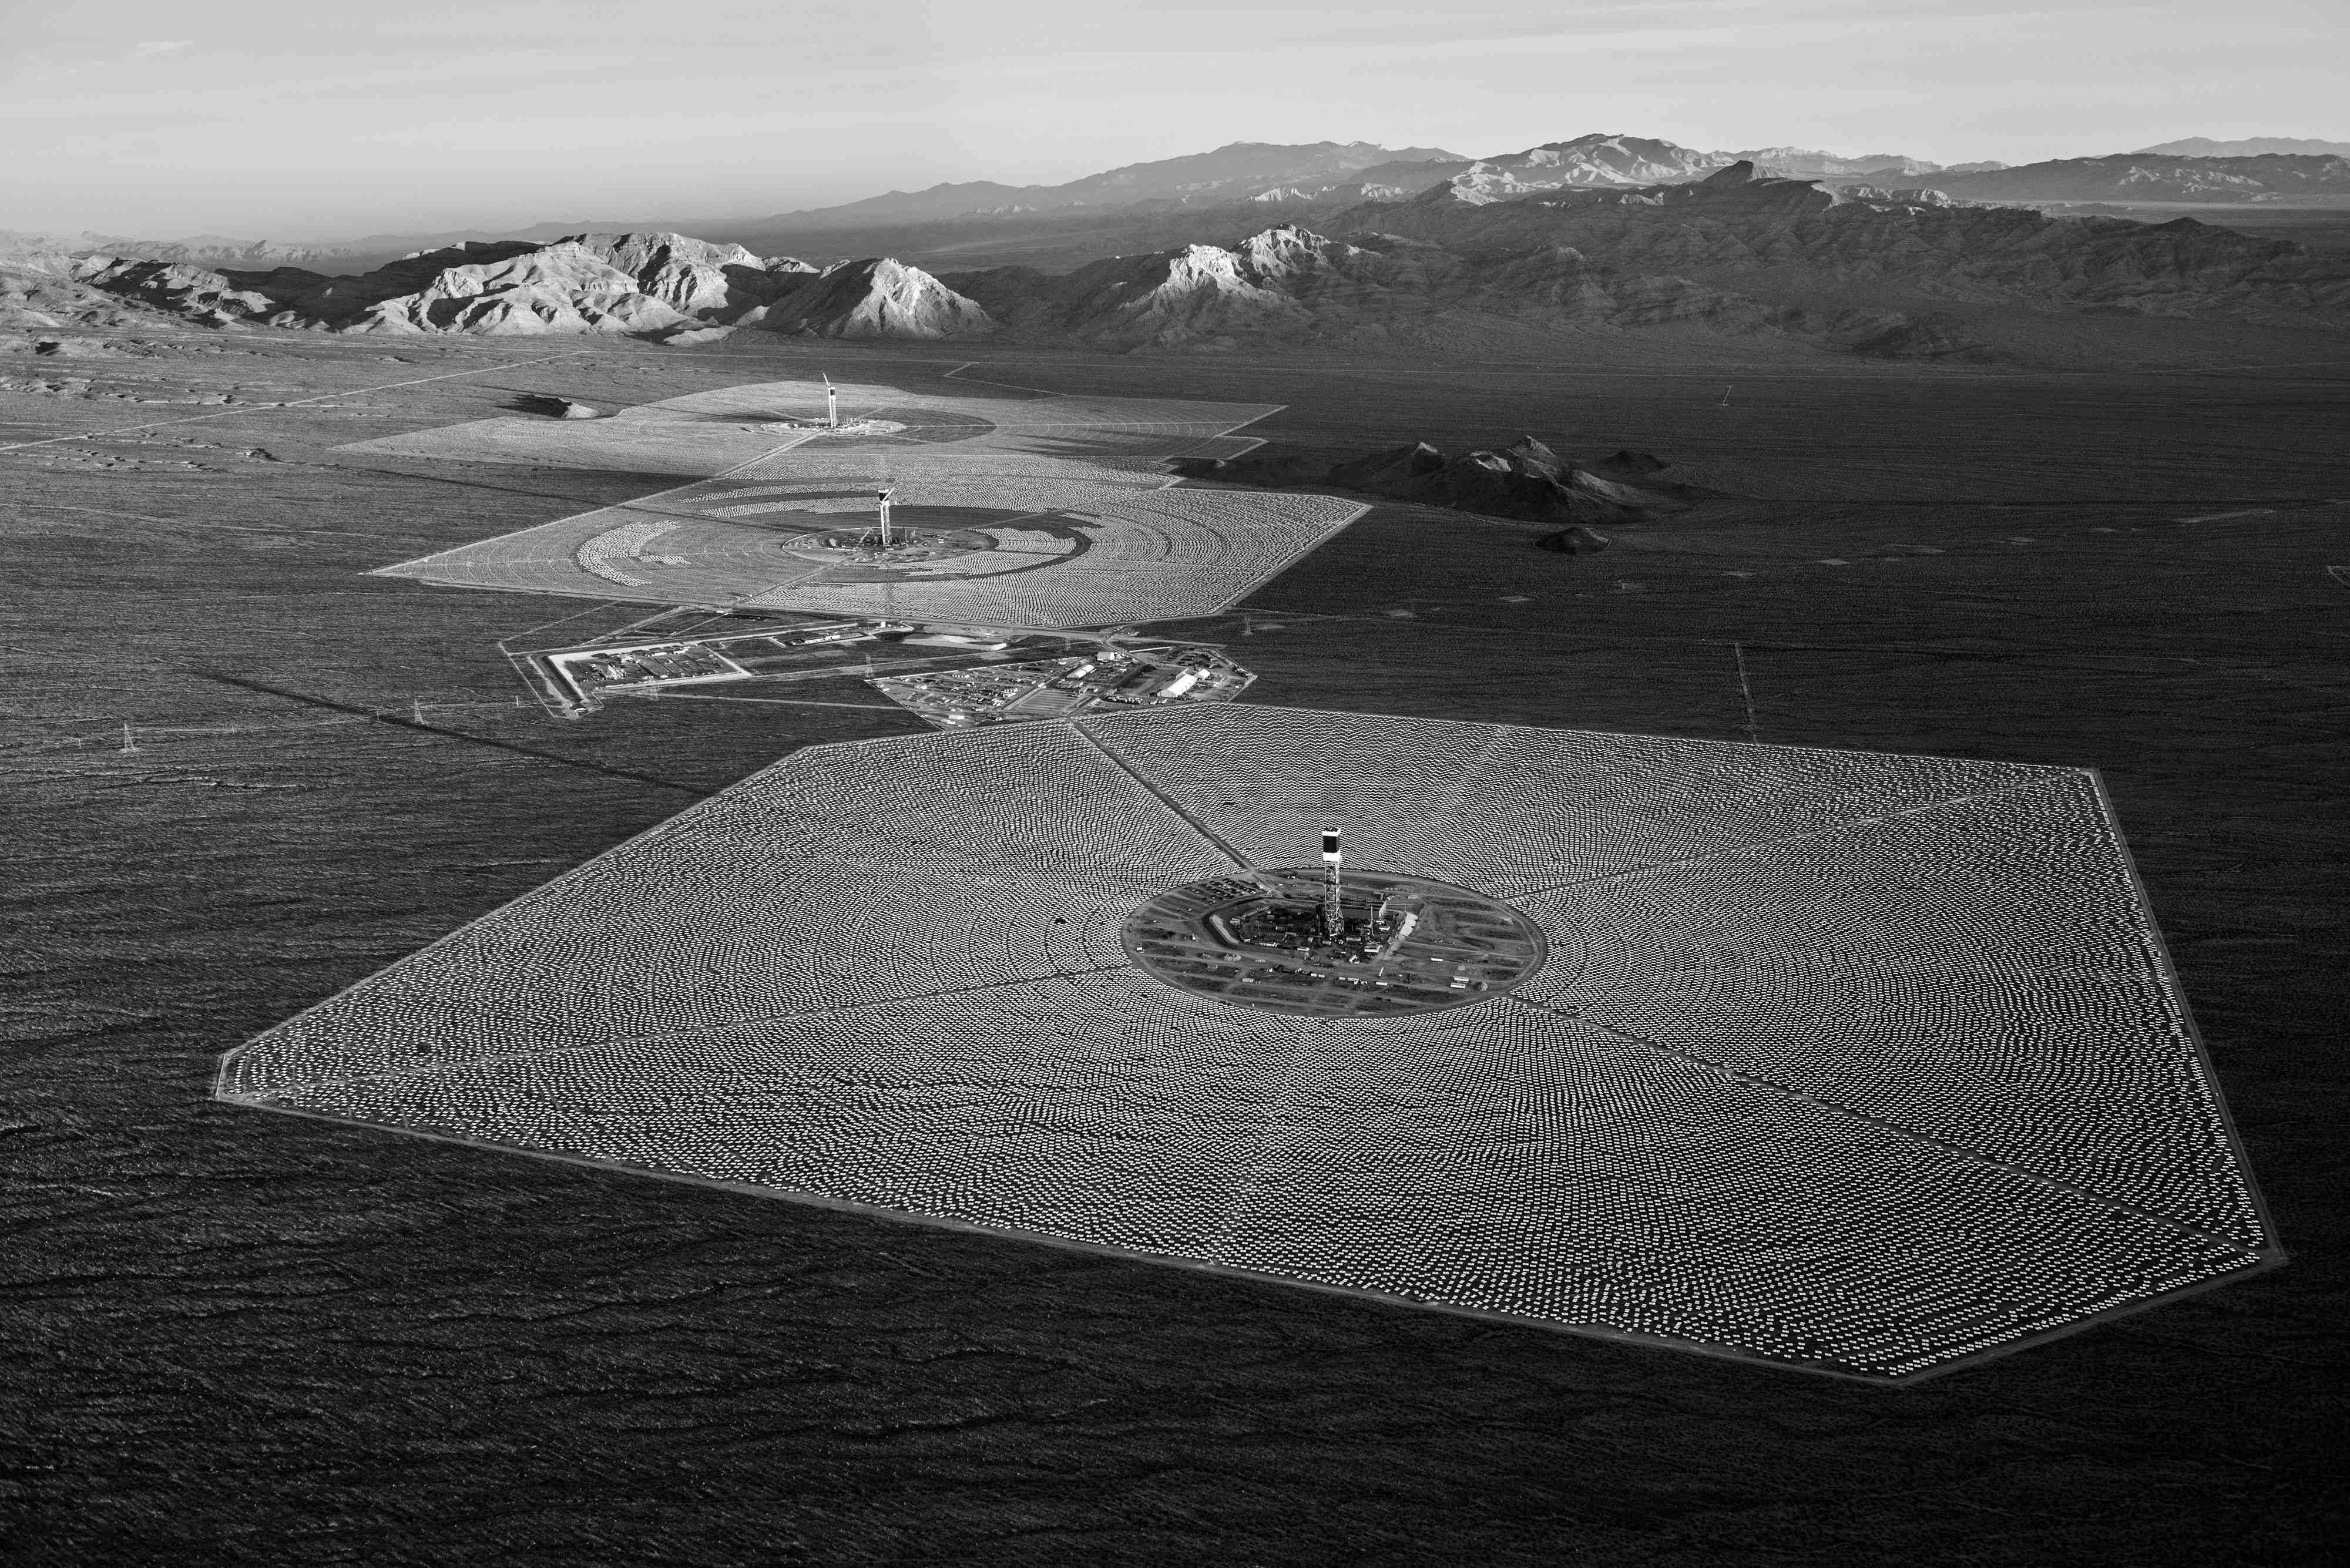 Jamey Stillings Black and White Photograph - The Evolution of Ivanpah Solar, #8502, 27 October 2012